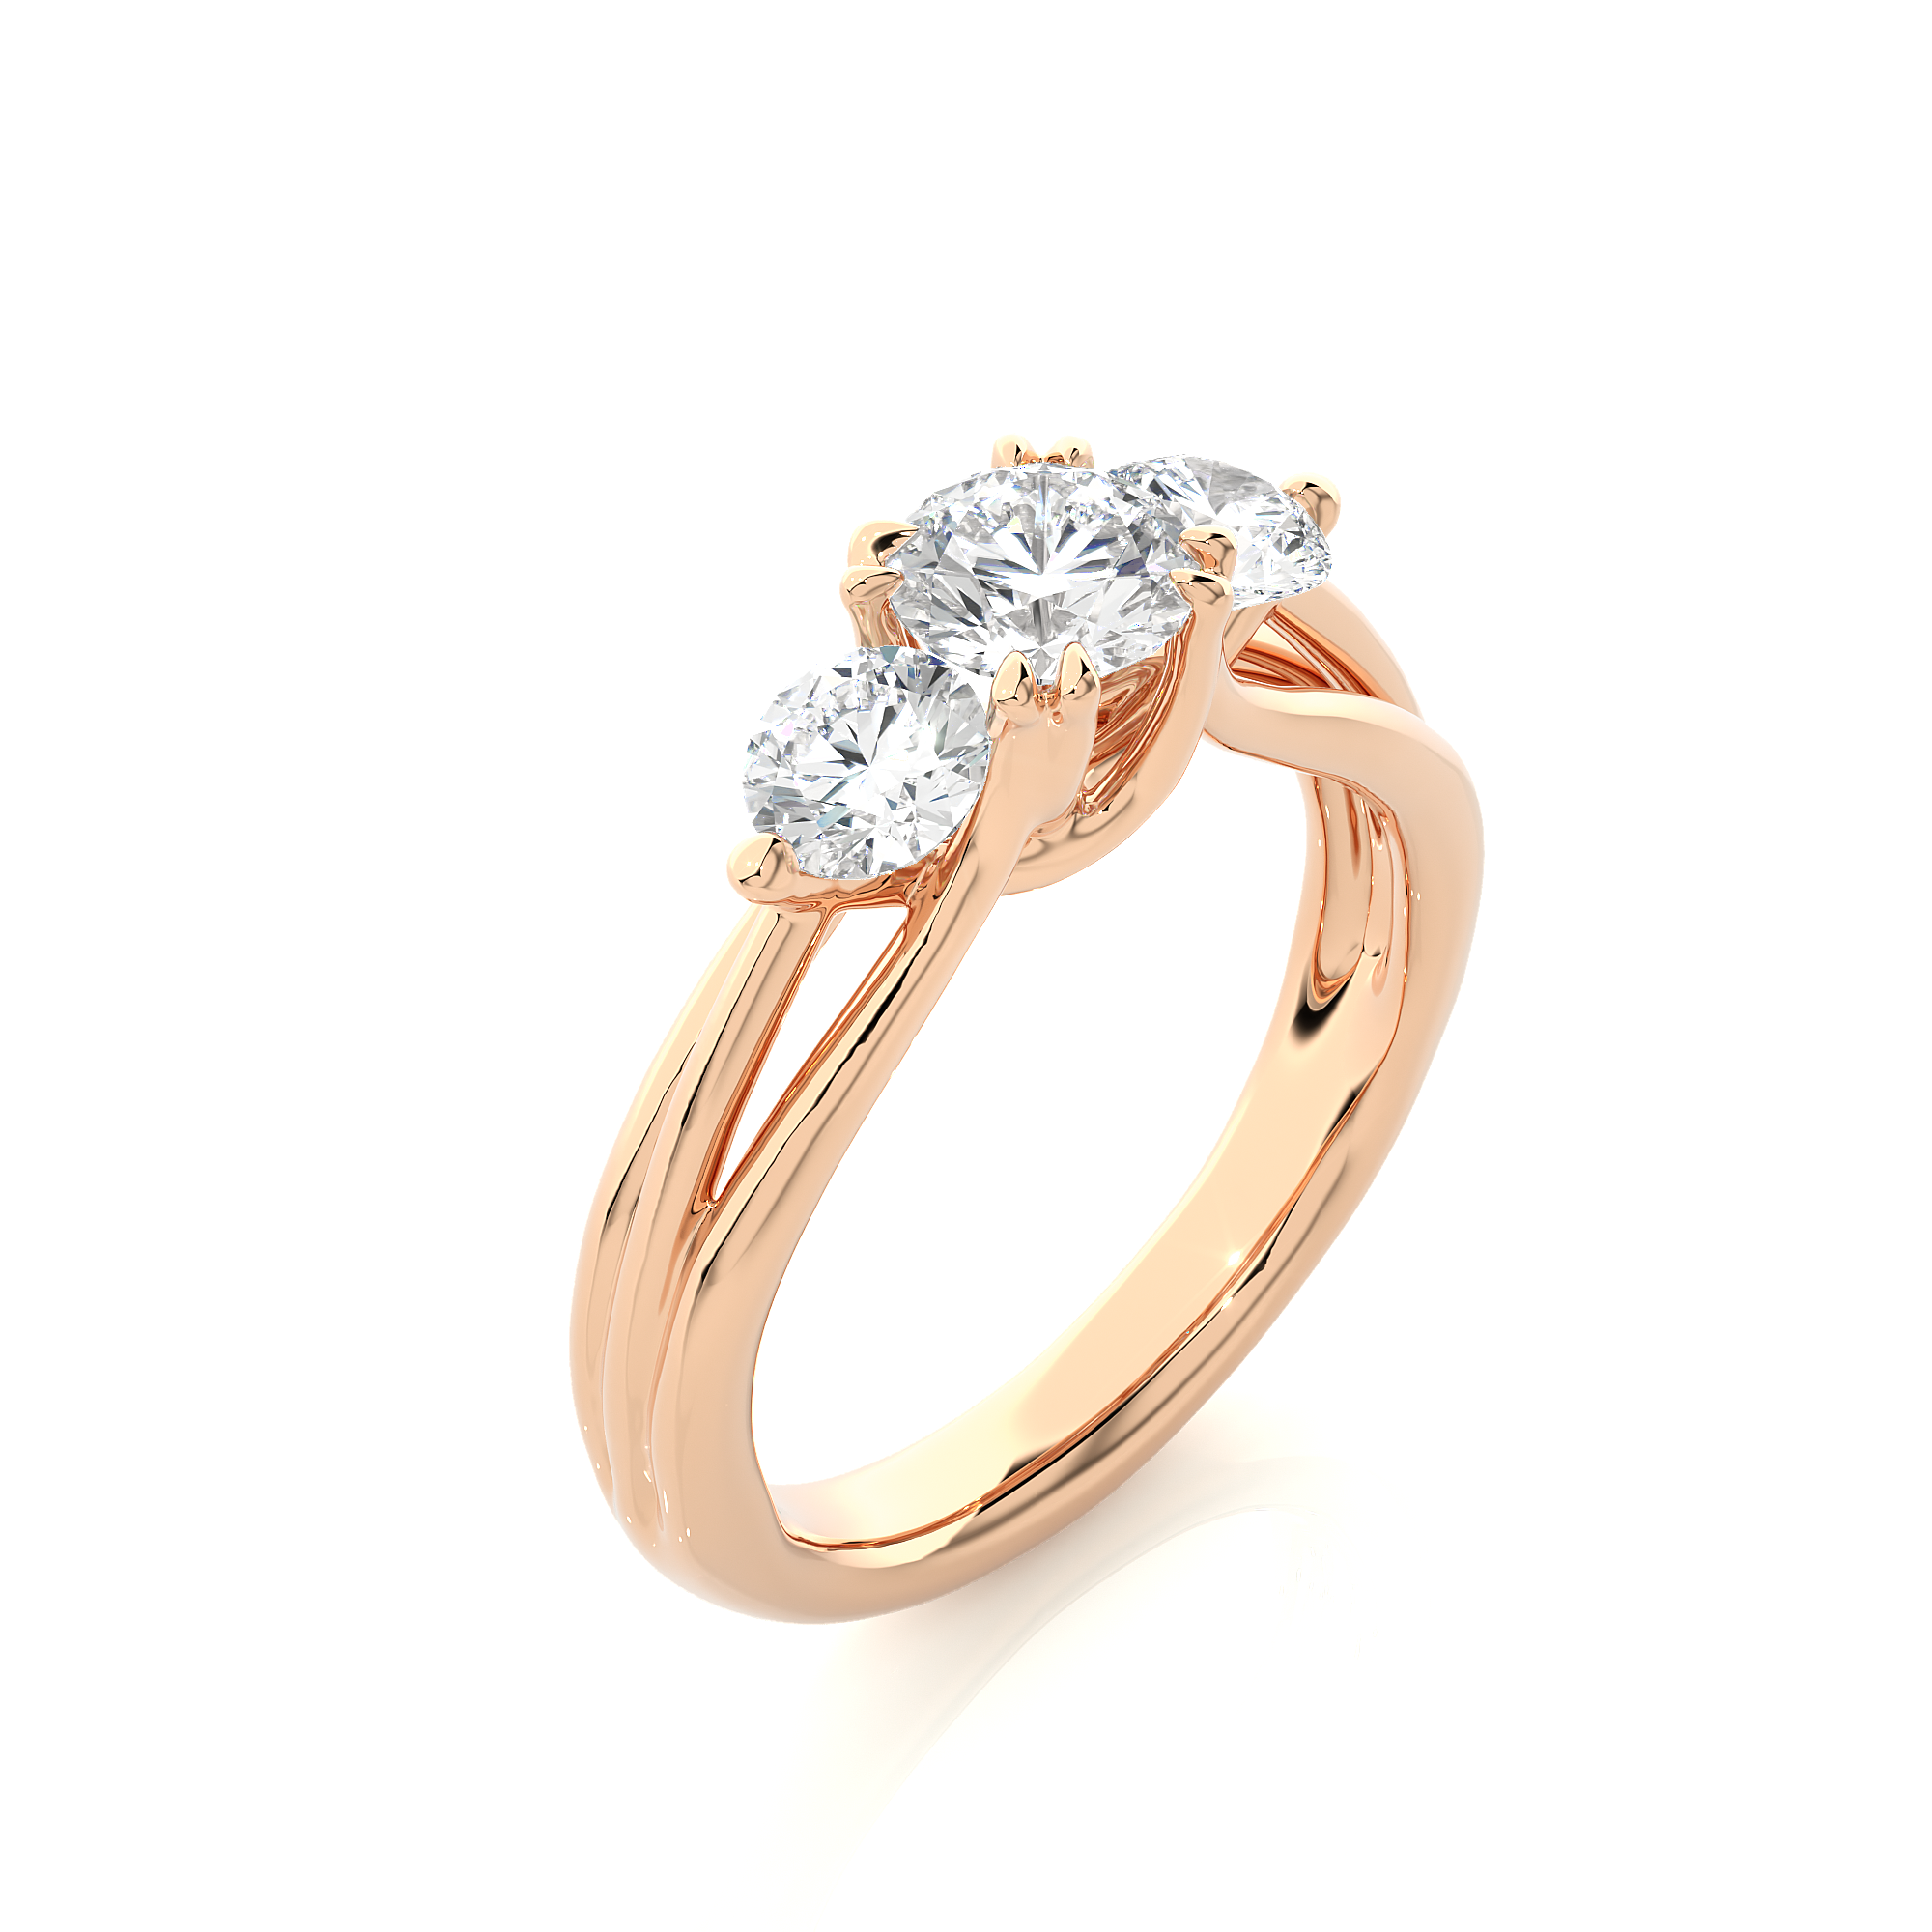 Dearie Darling Solitaire Lab Grown Diamond Ring